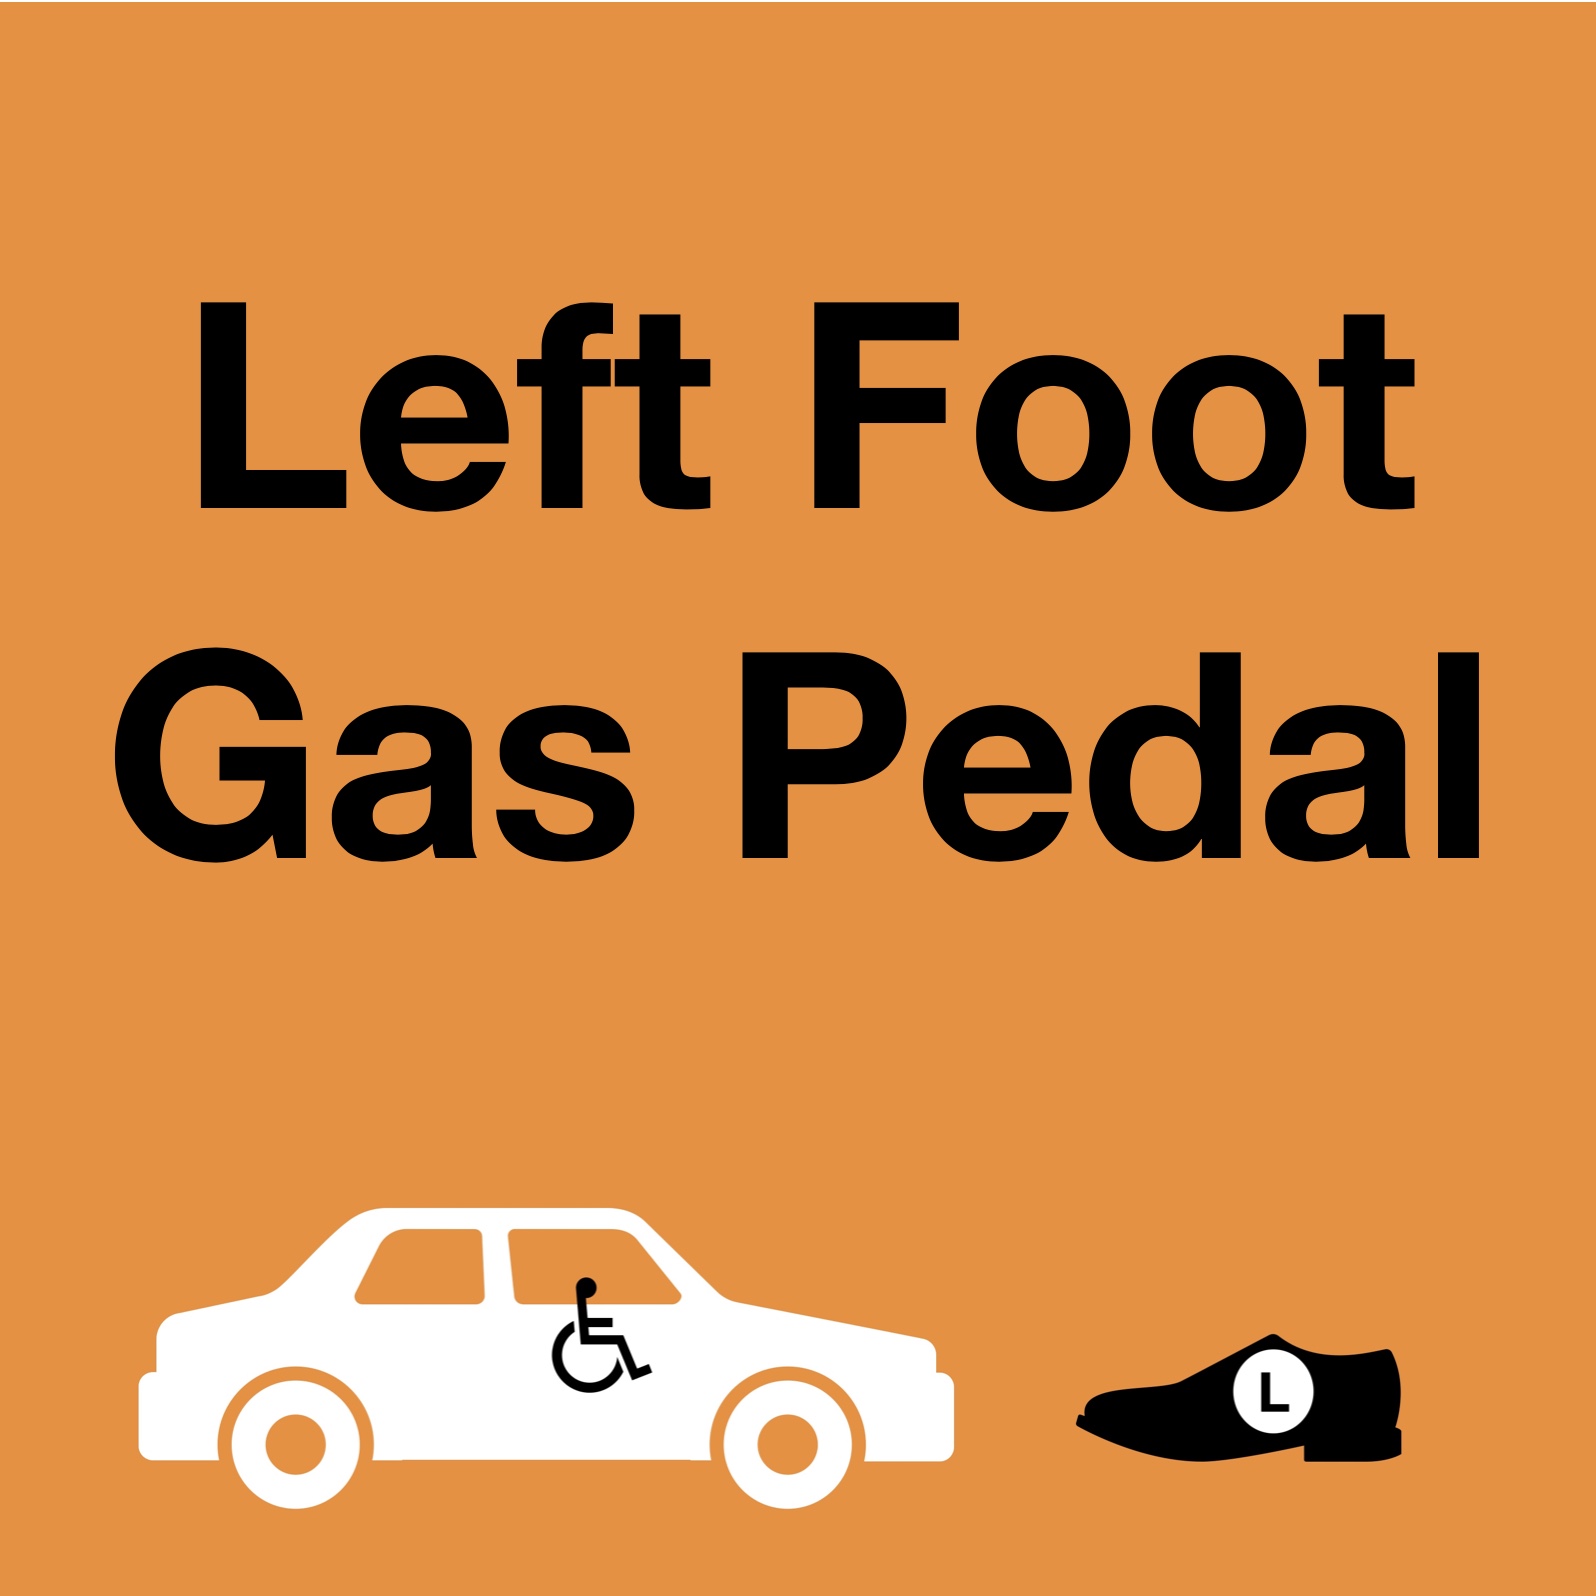 Left Foot Gas Pedal